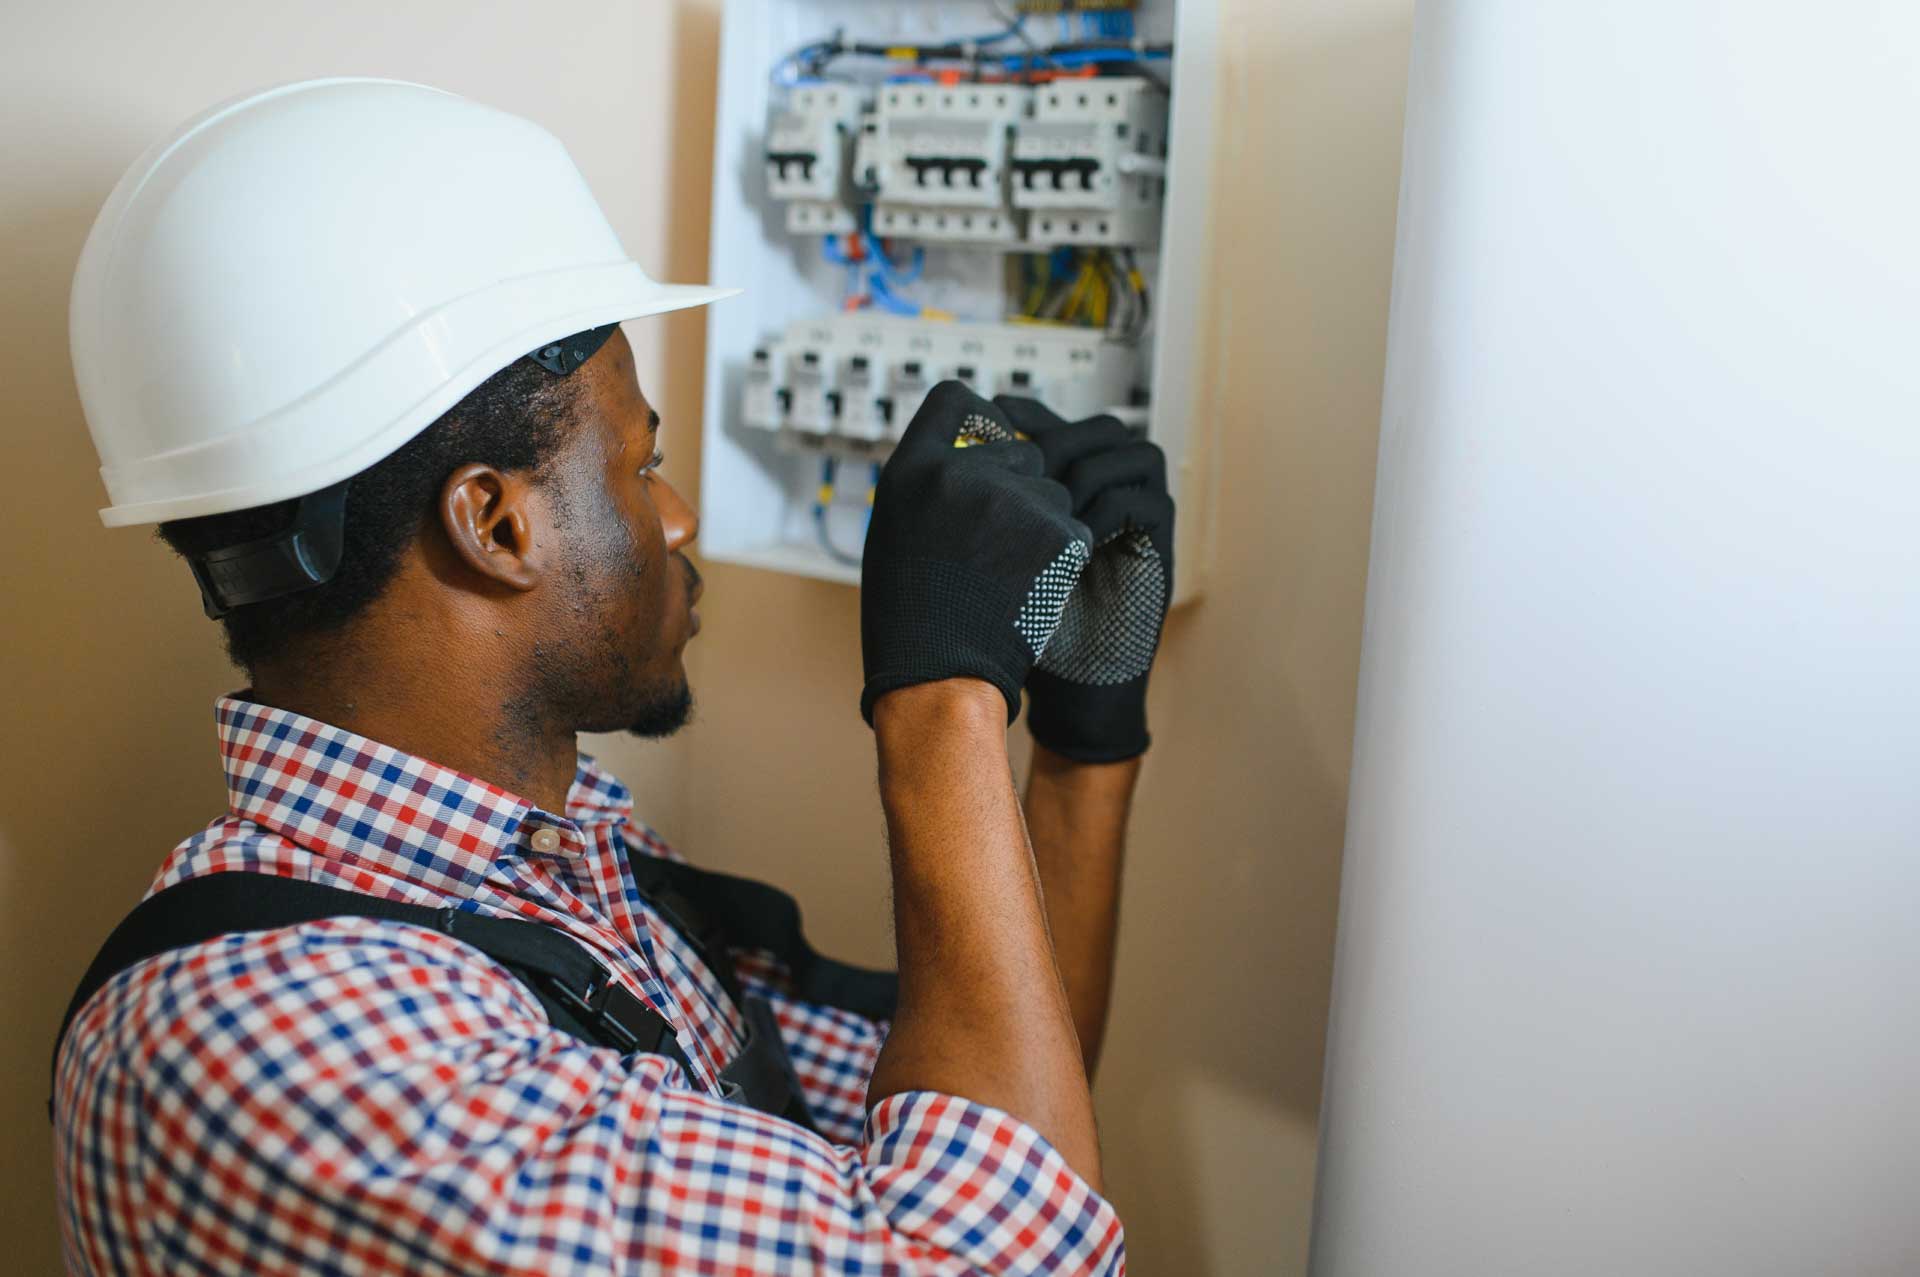 An electrician wearing a hard hat and gloves works on a tub replacement circuit breaker panel.